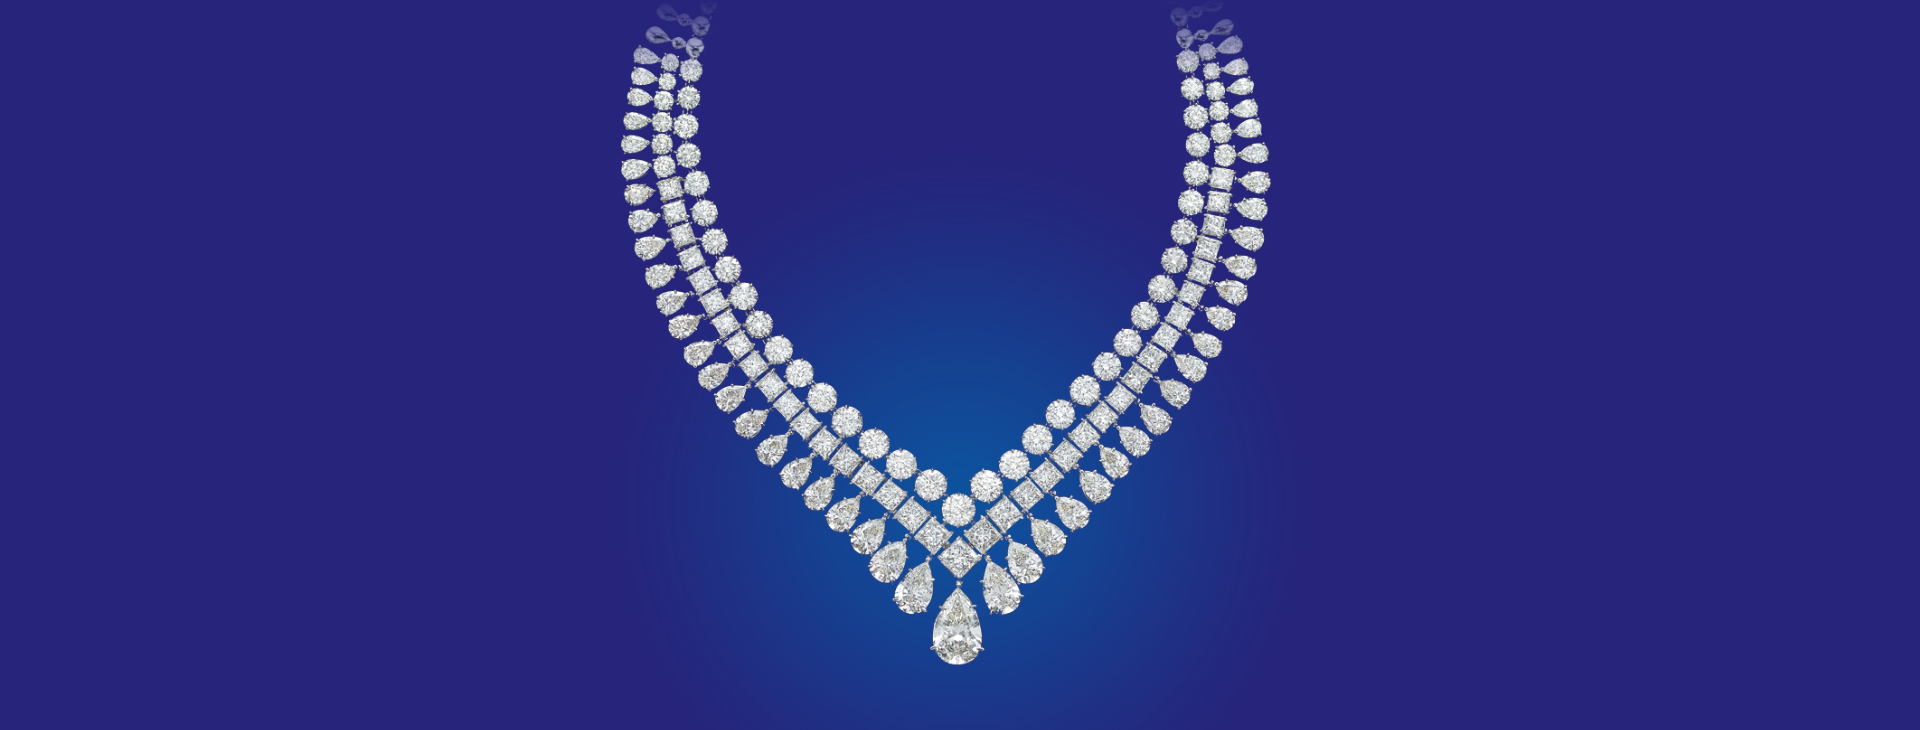 EF-IF Diamond Jewelry: The Smart Choice for Quality and Investment